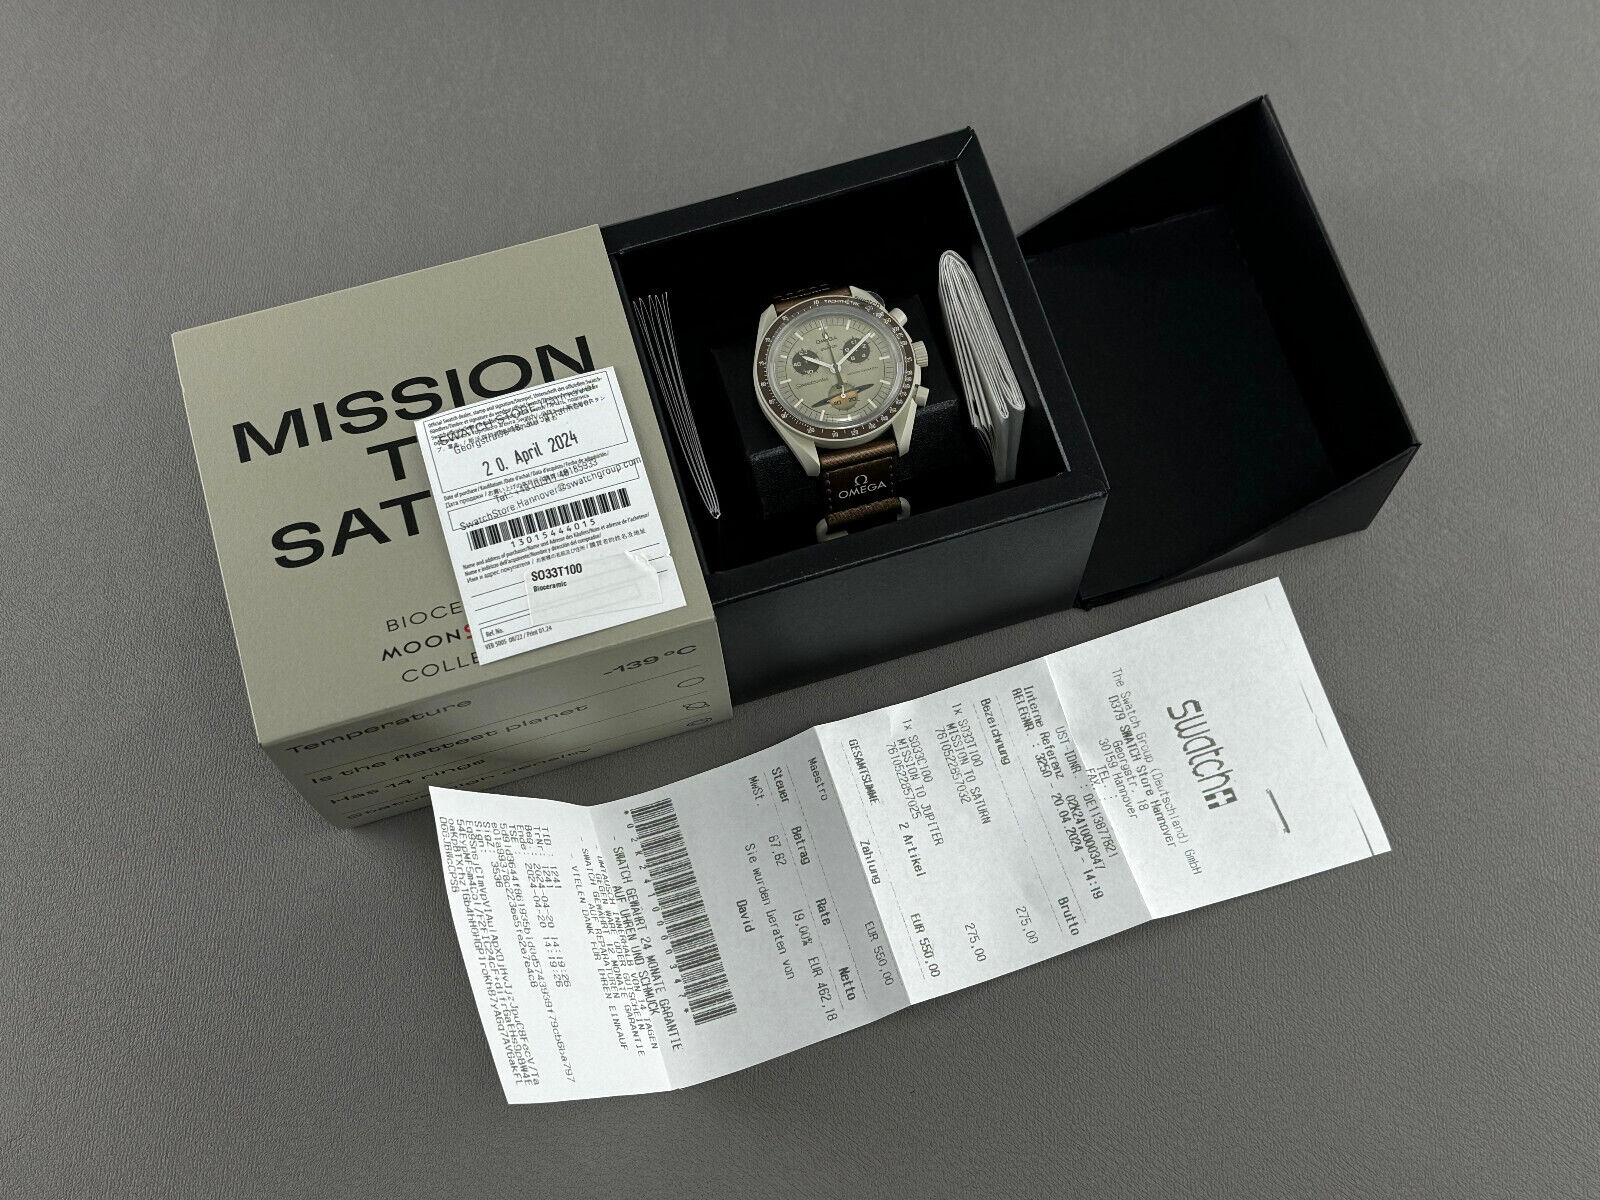 Omega x Swatch MoonSwatch mission to Saturn SO33T100